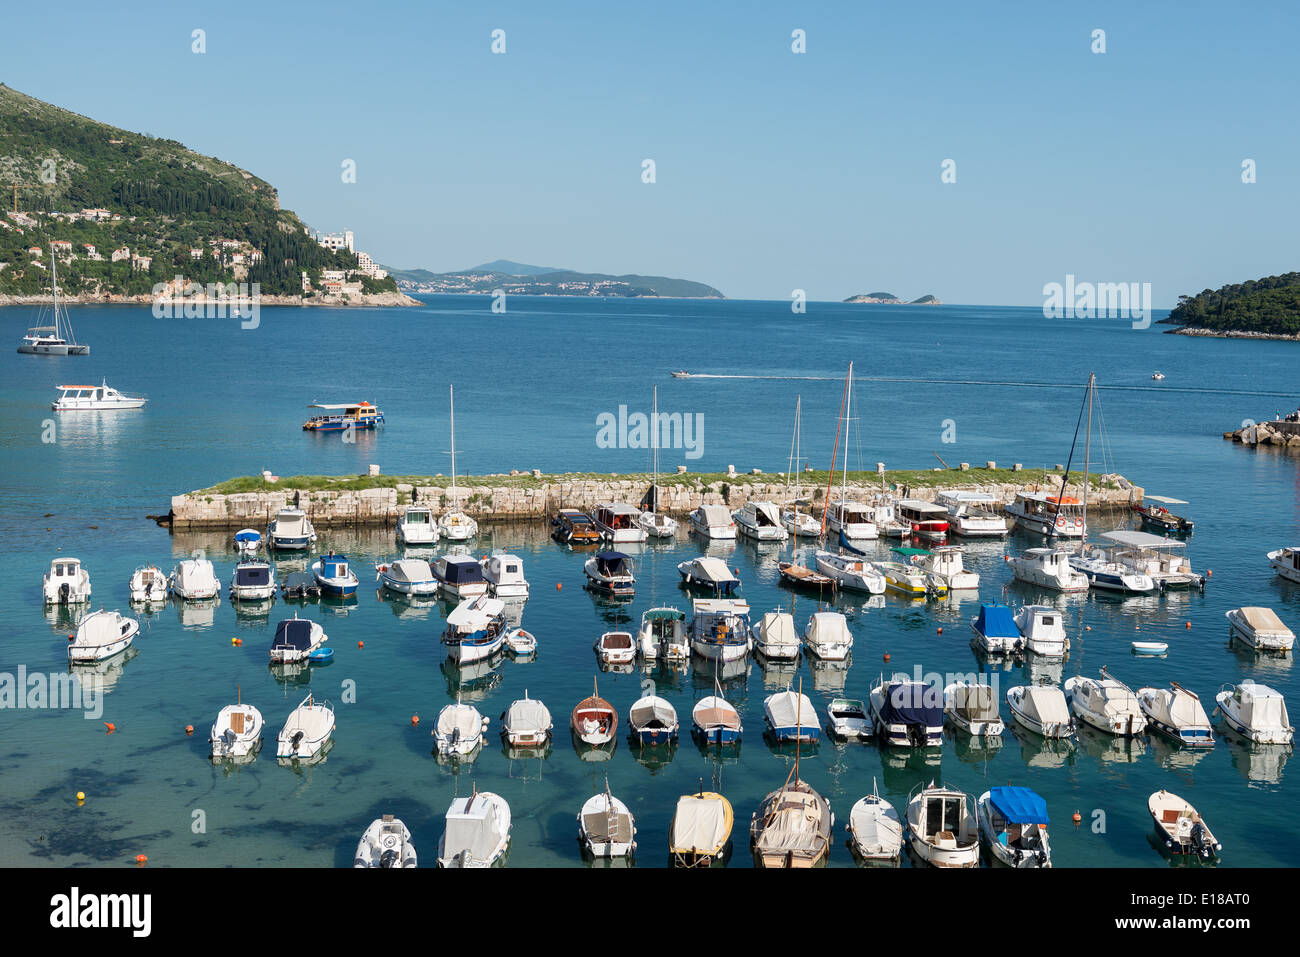 View across the harbour with boats in the foreground and the sea in the background, Dubrovnik, Croatia Stock Photo